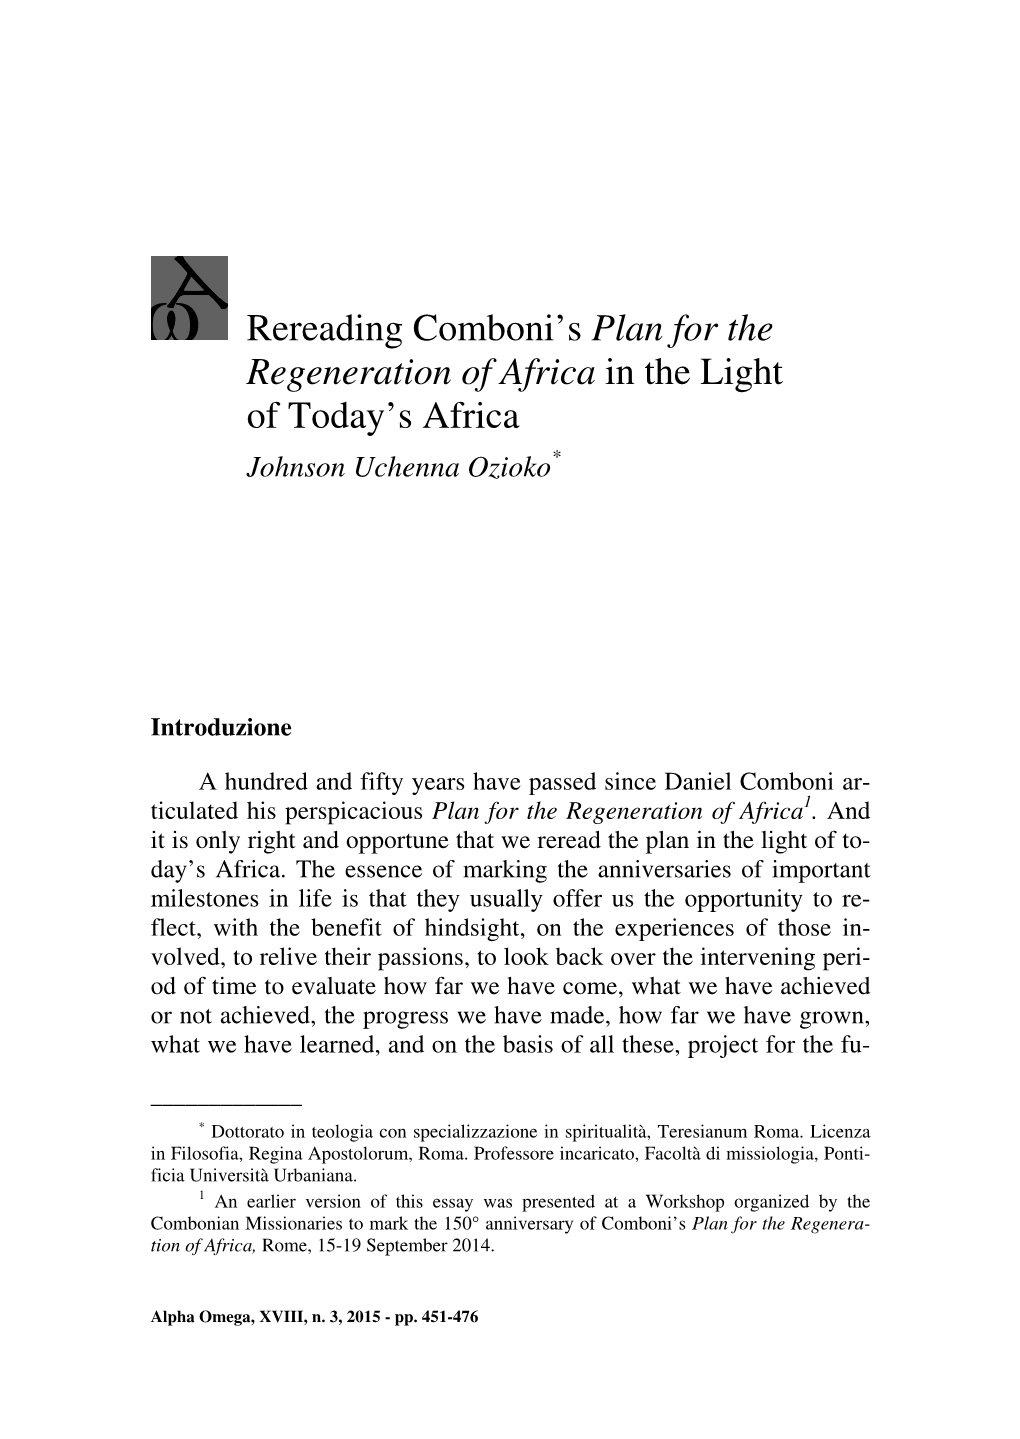 Rereading Comboni's Plan for the Regeneration of Africa in the Light